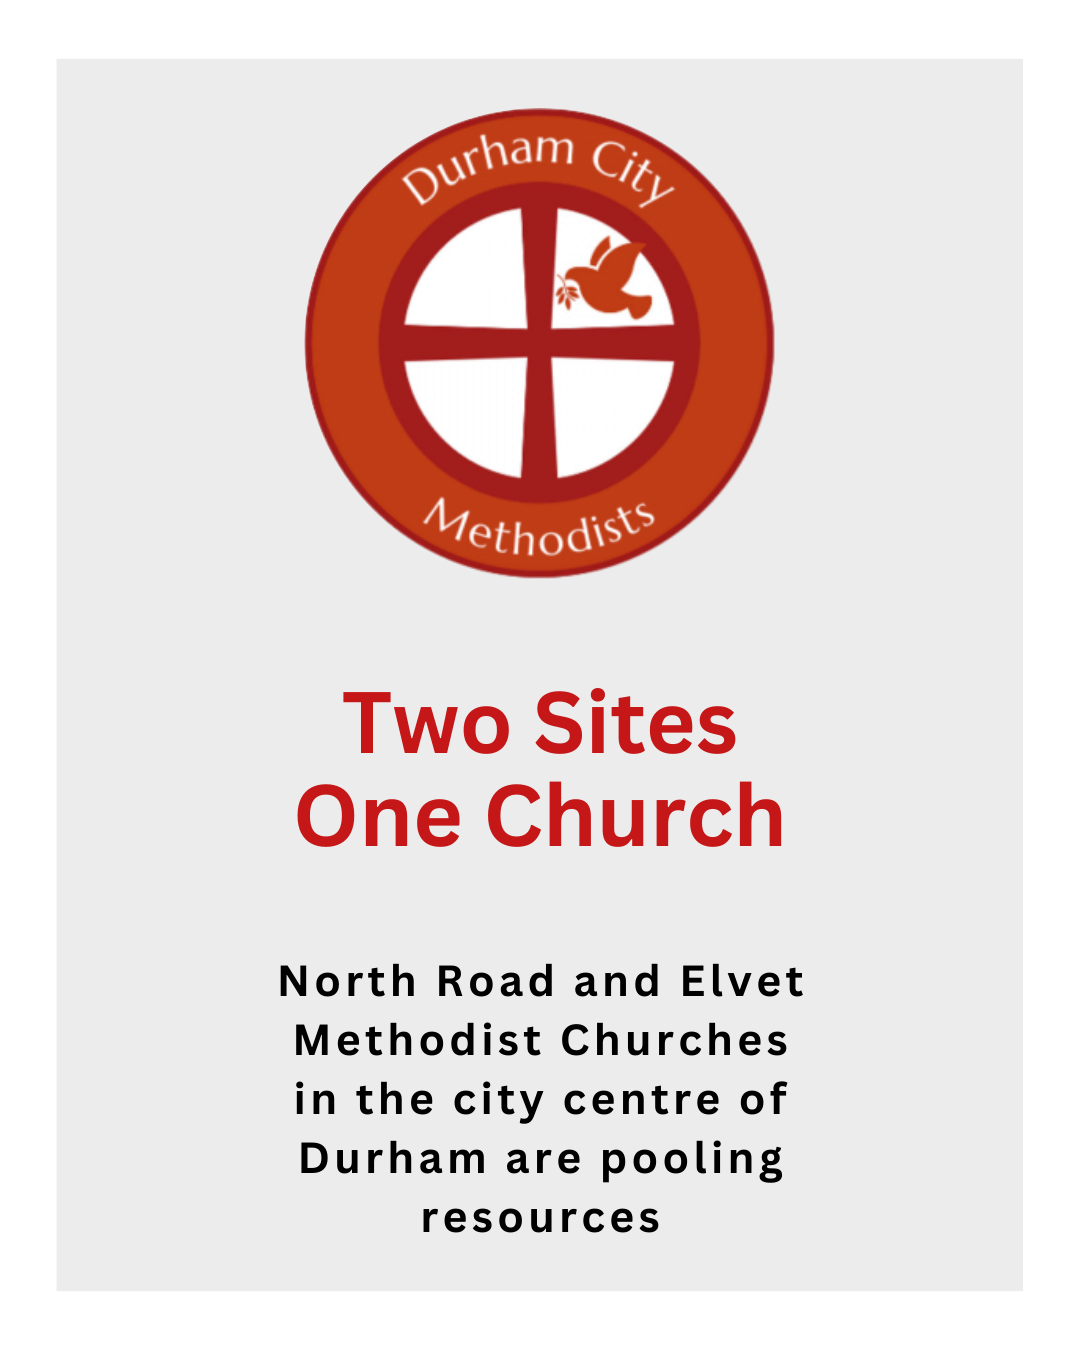 Two Sites, One Church. North Road and Elvet Methodist Churches in the city centre of Durham are pooling resources